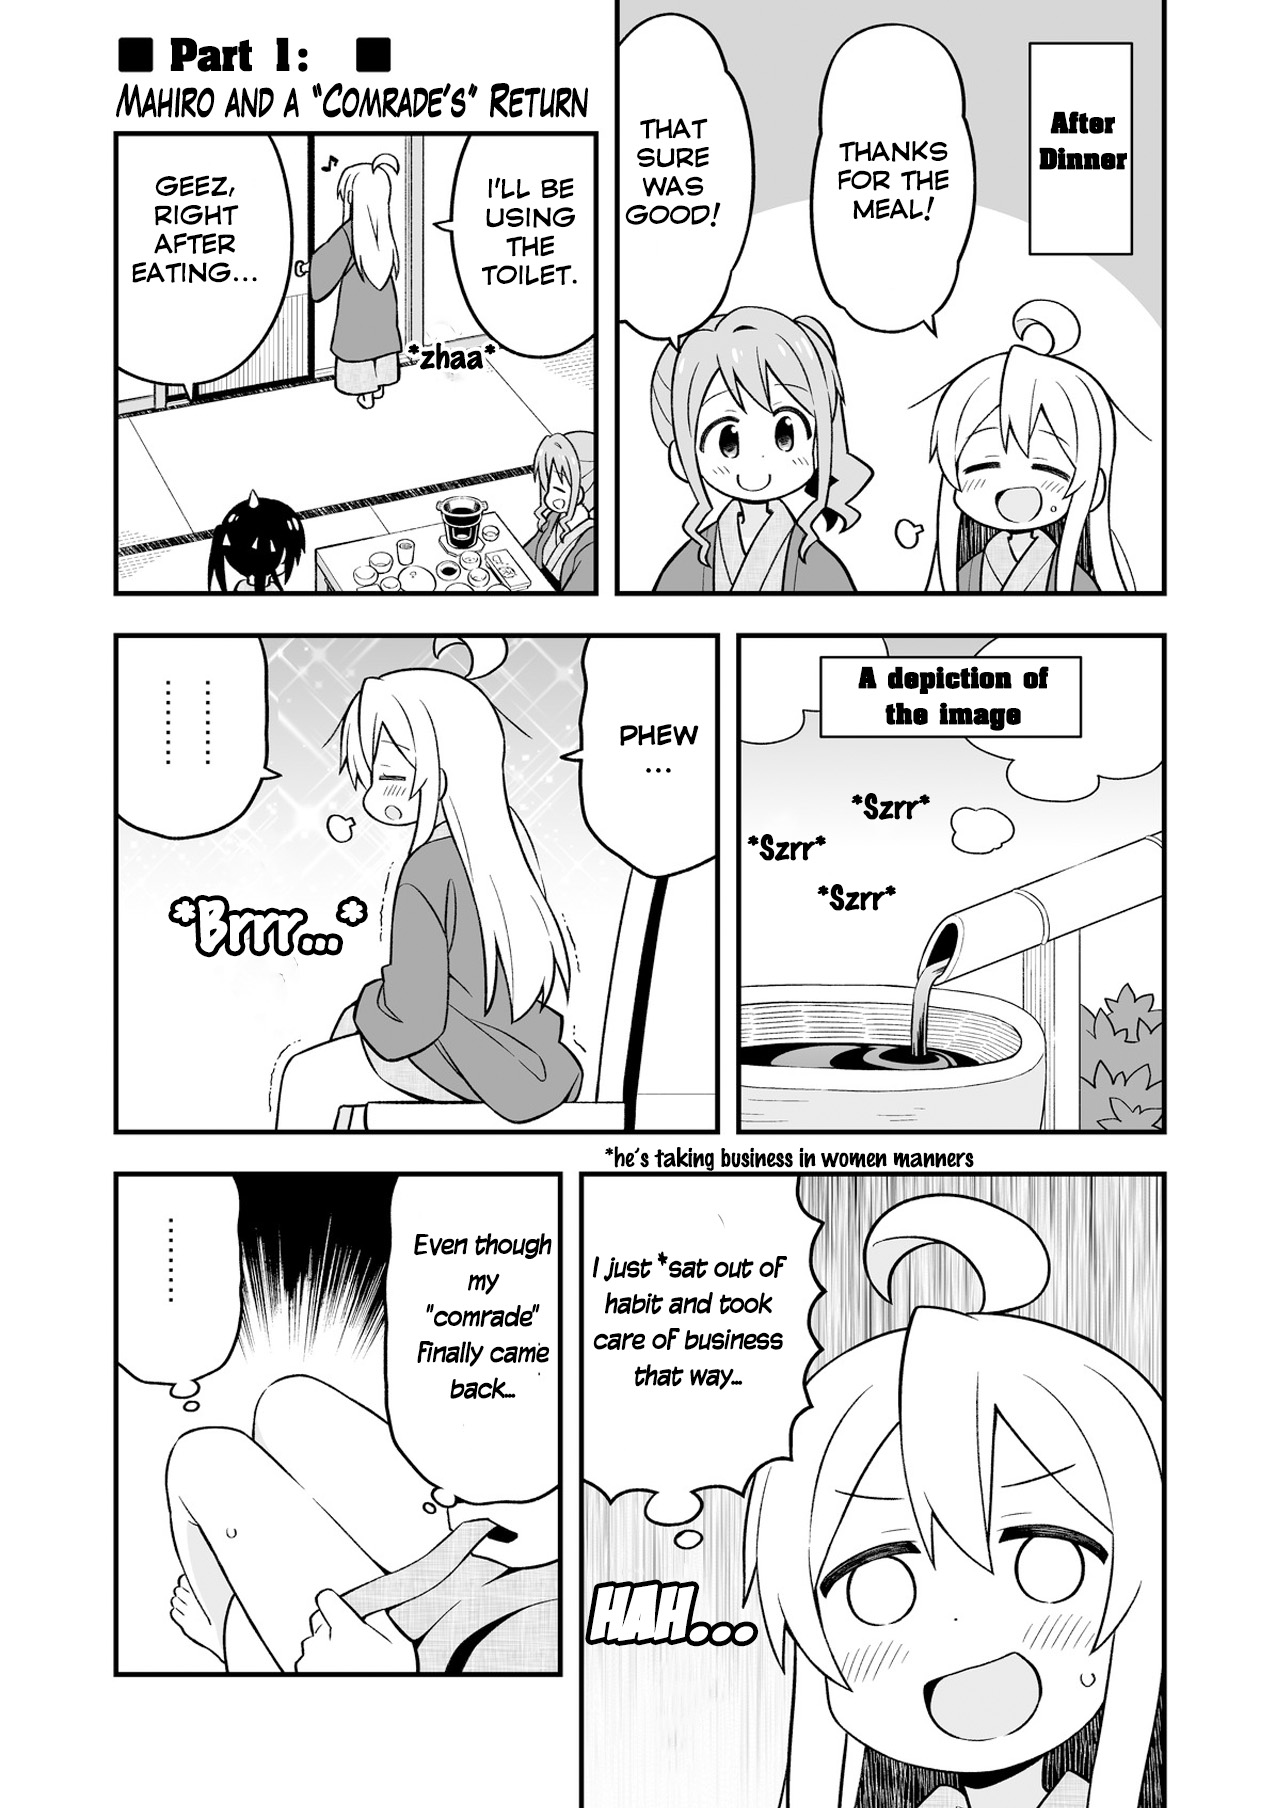 Onii chan is Done For! Vol. 2 Ch. 18.5 Part 1